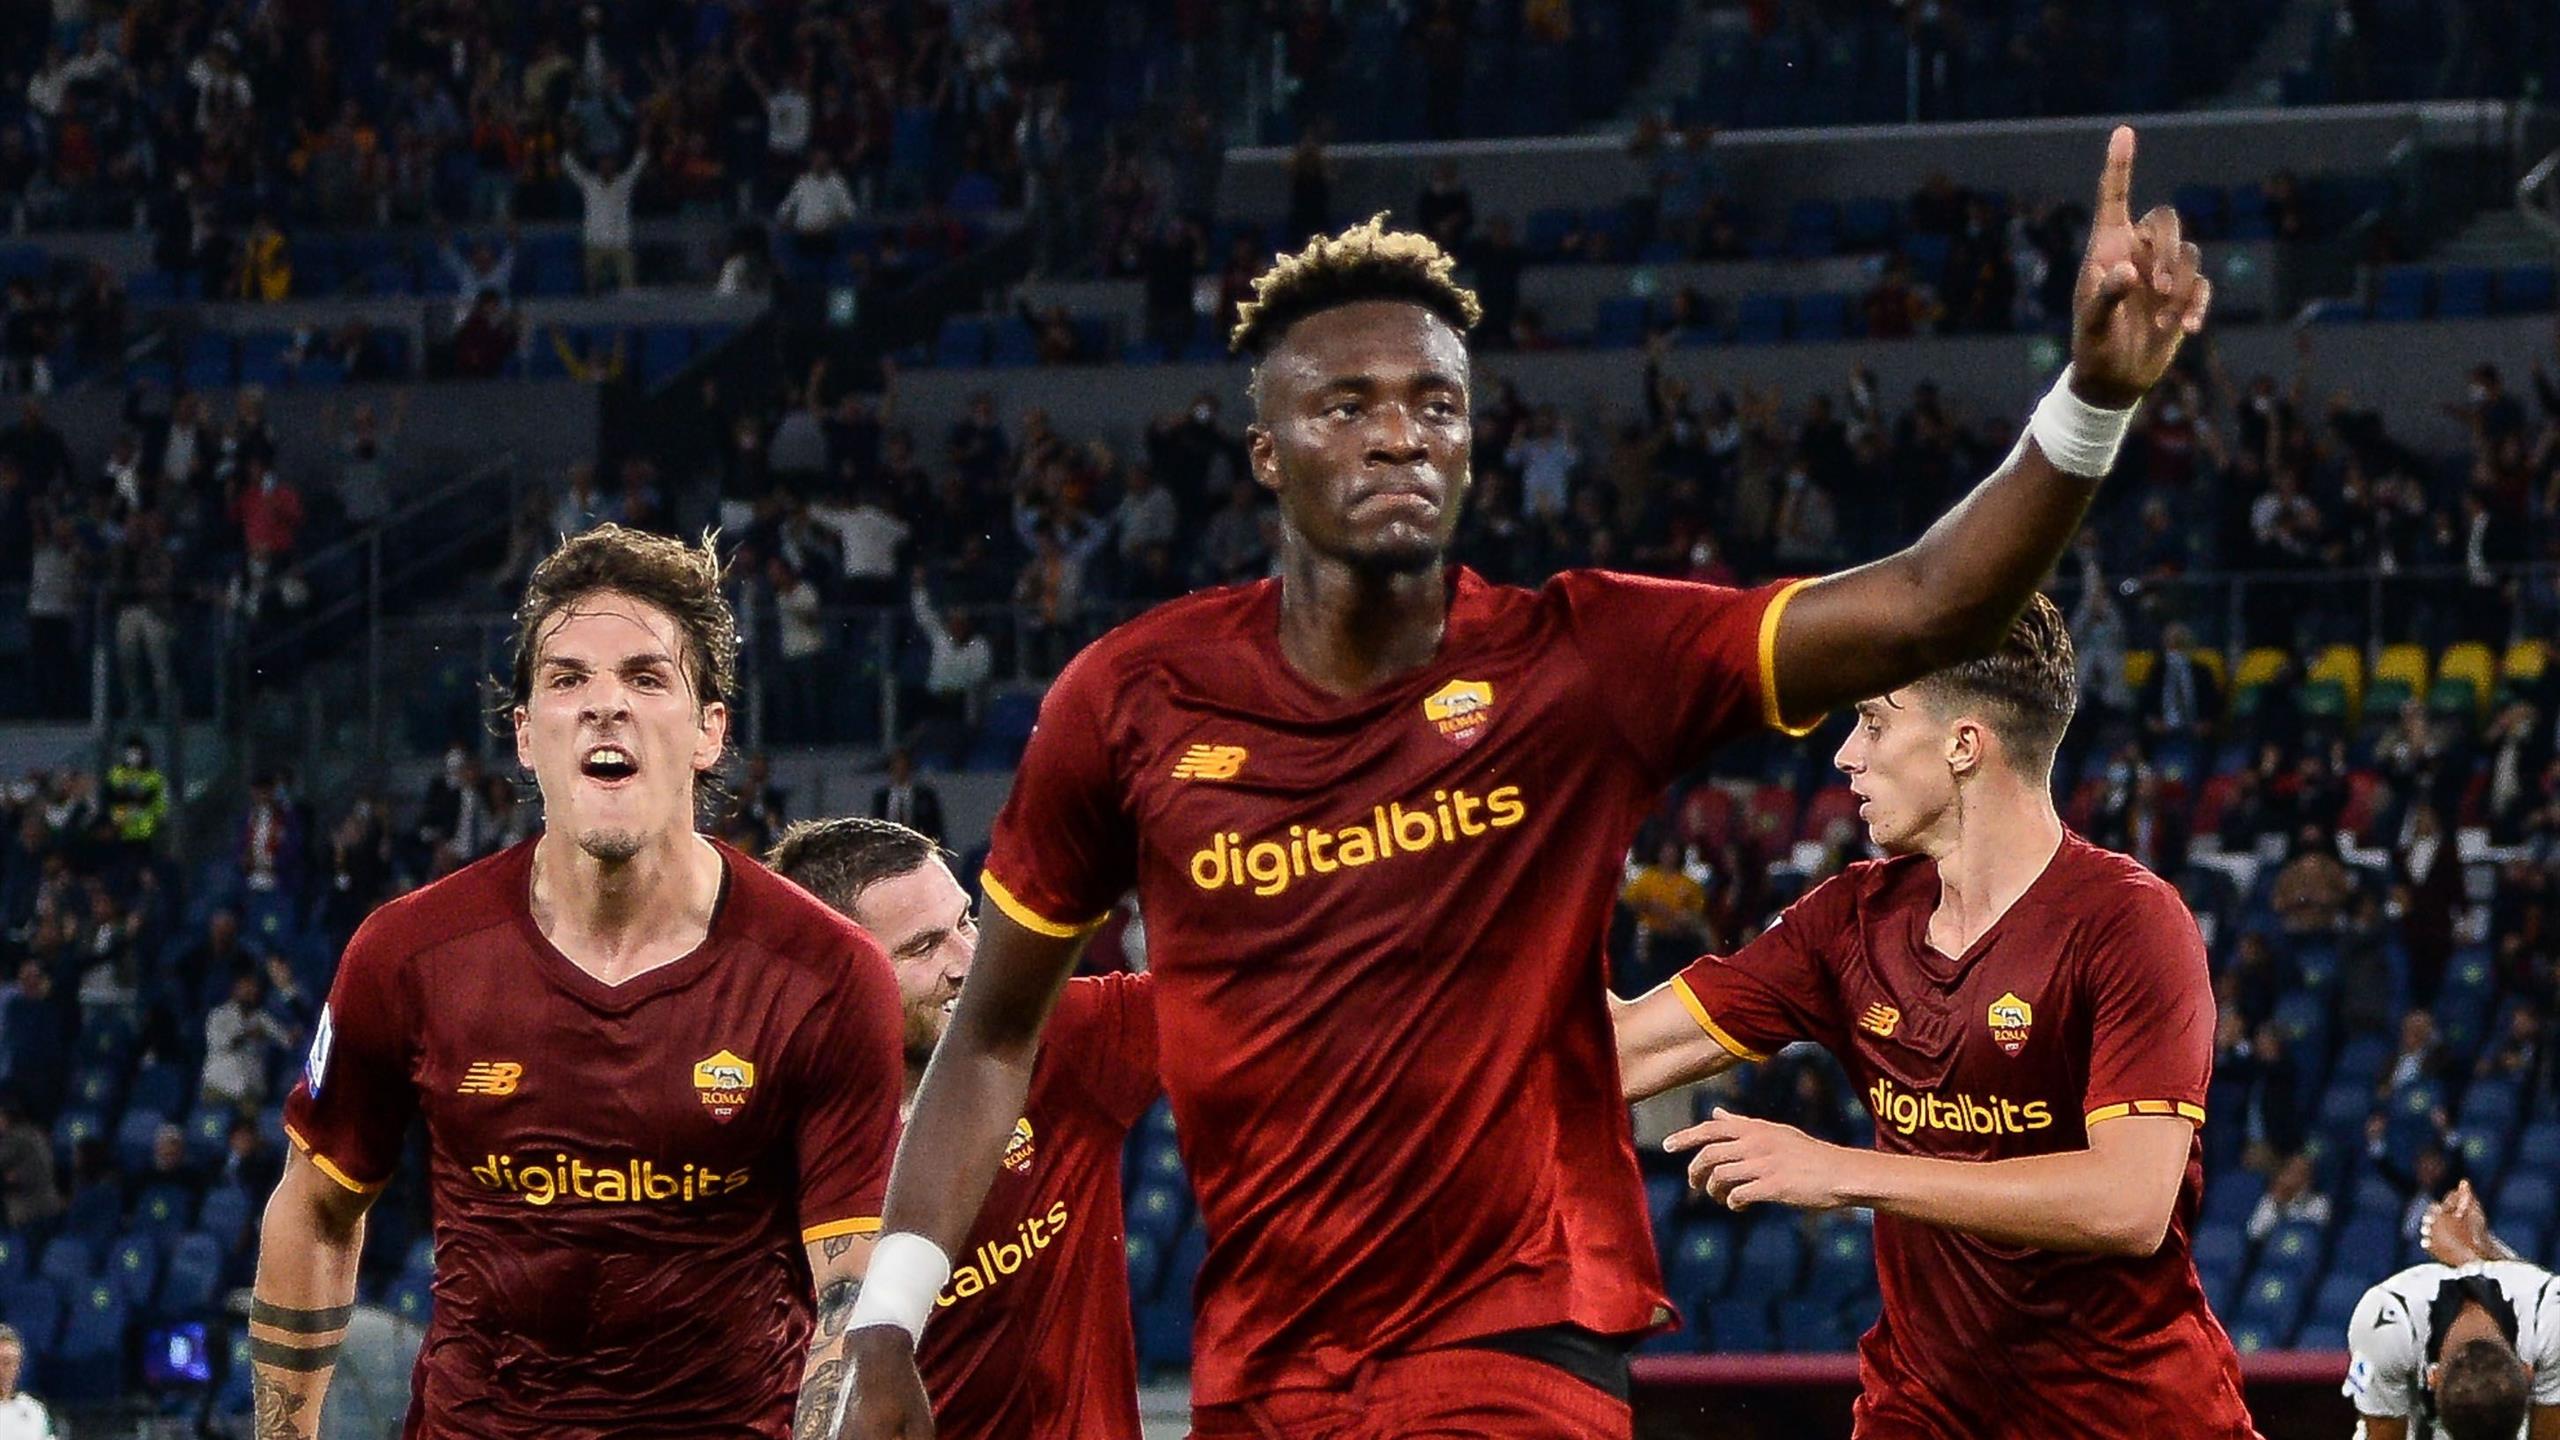 Tammy abraham and roma are rolling after udinese win sends them fourth in serie a table